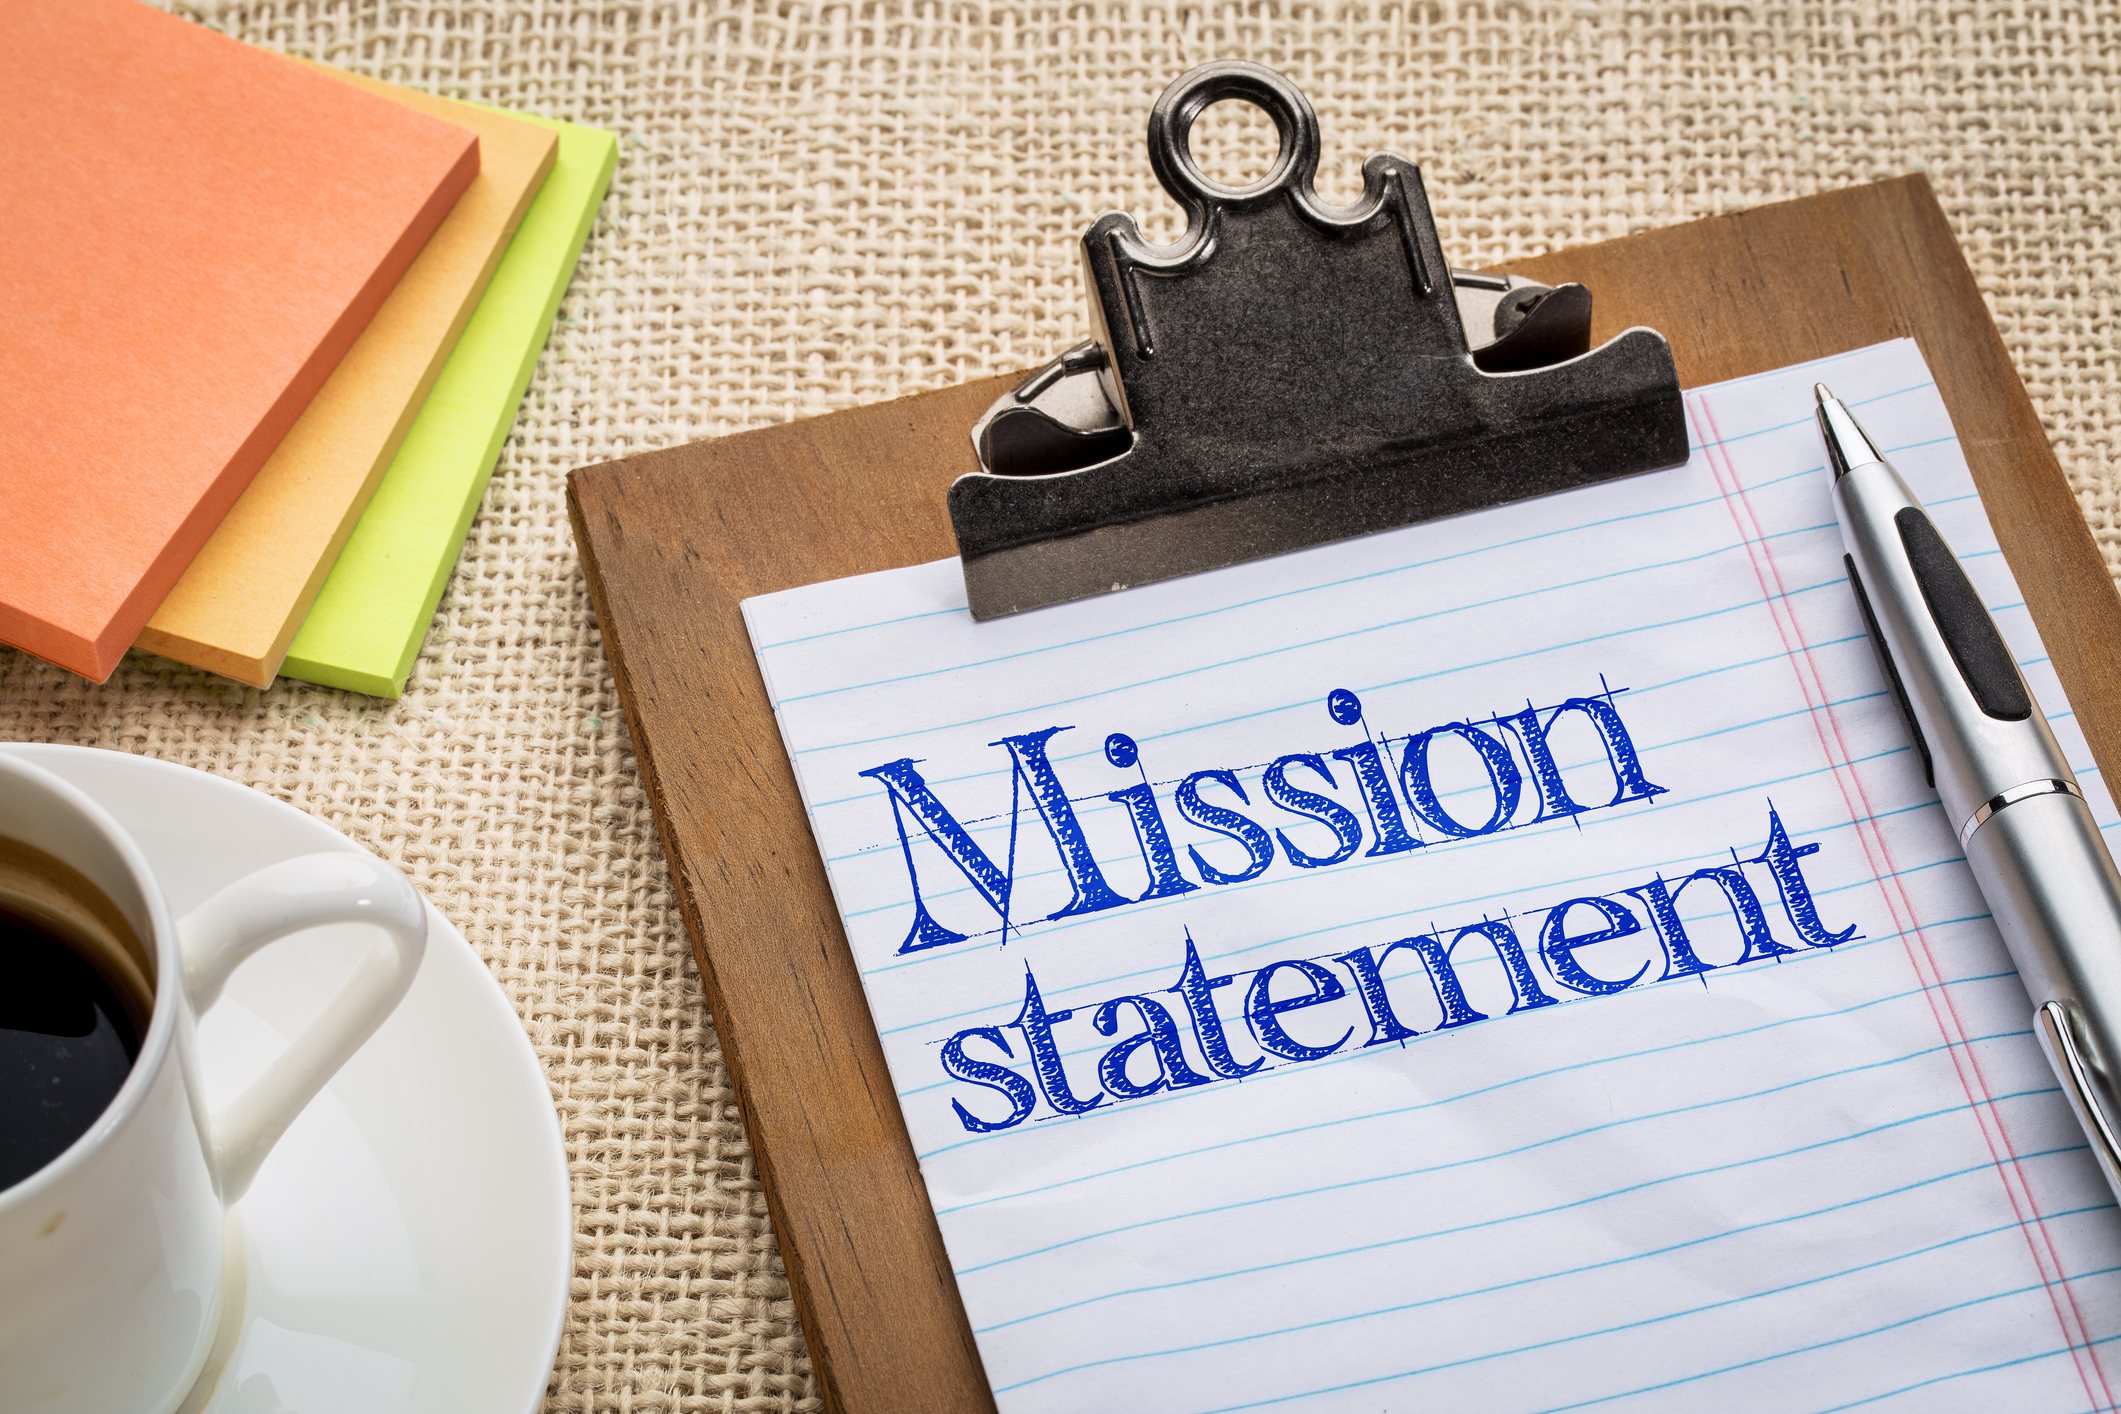 Personal mission statement